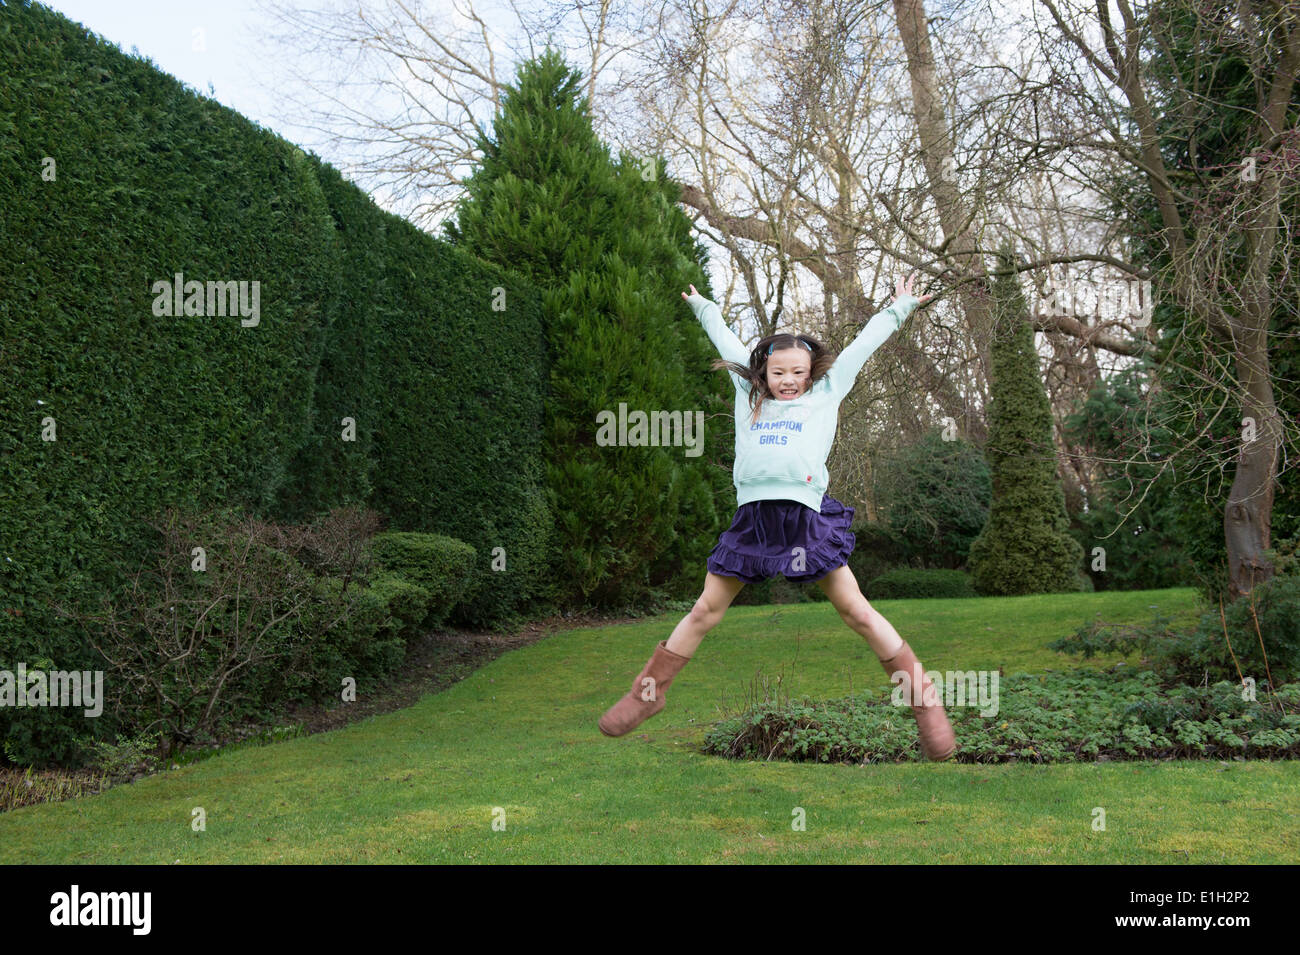 Young girl jumping mid air in garden Stock Photo